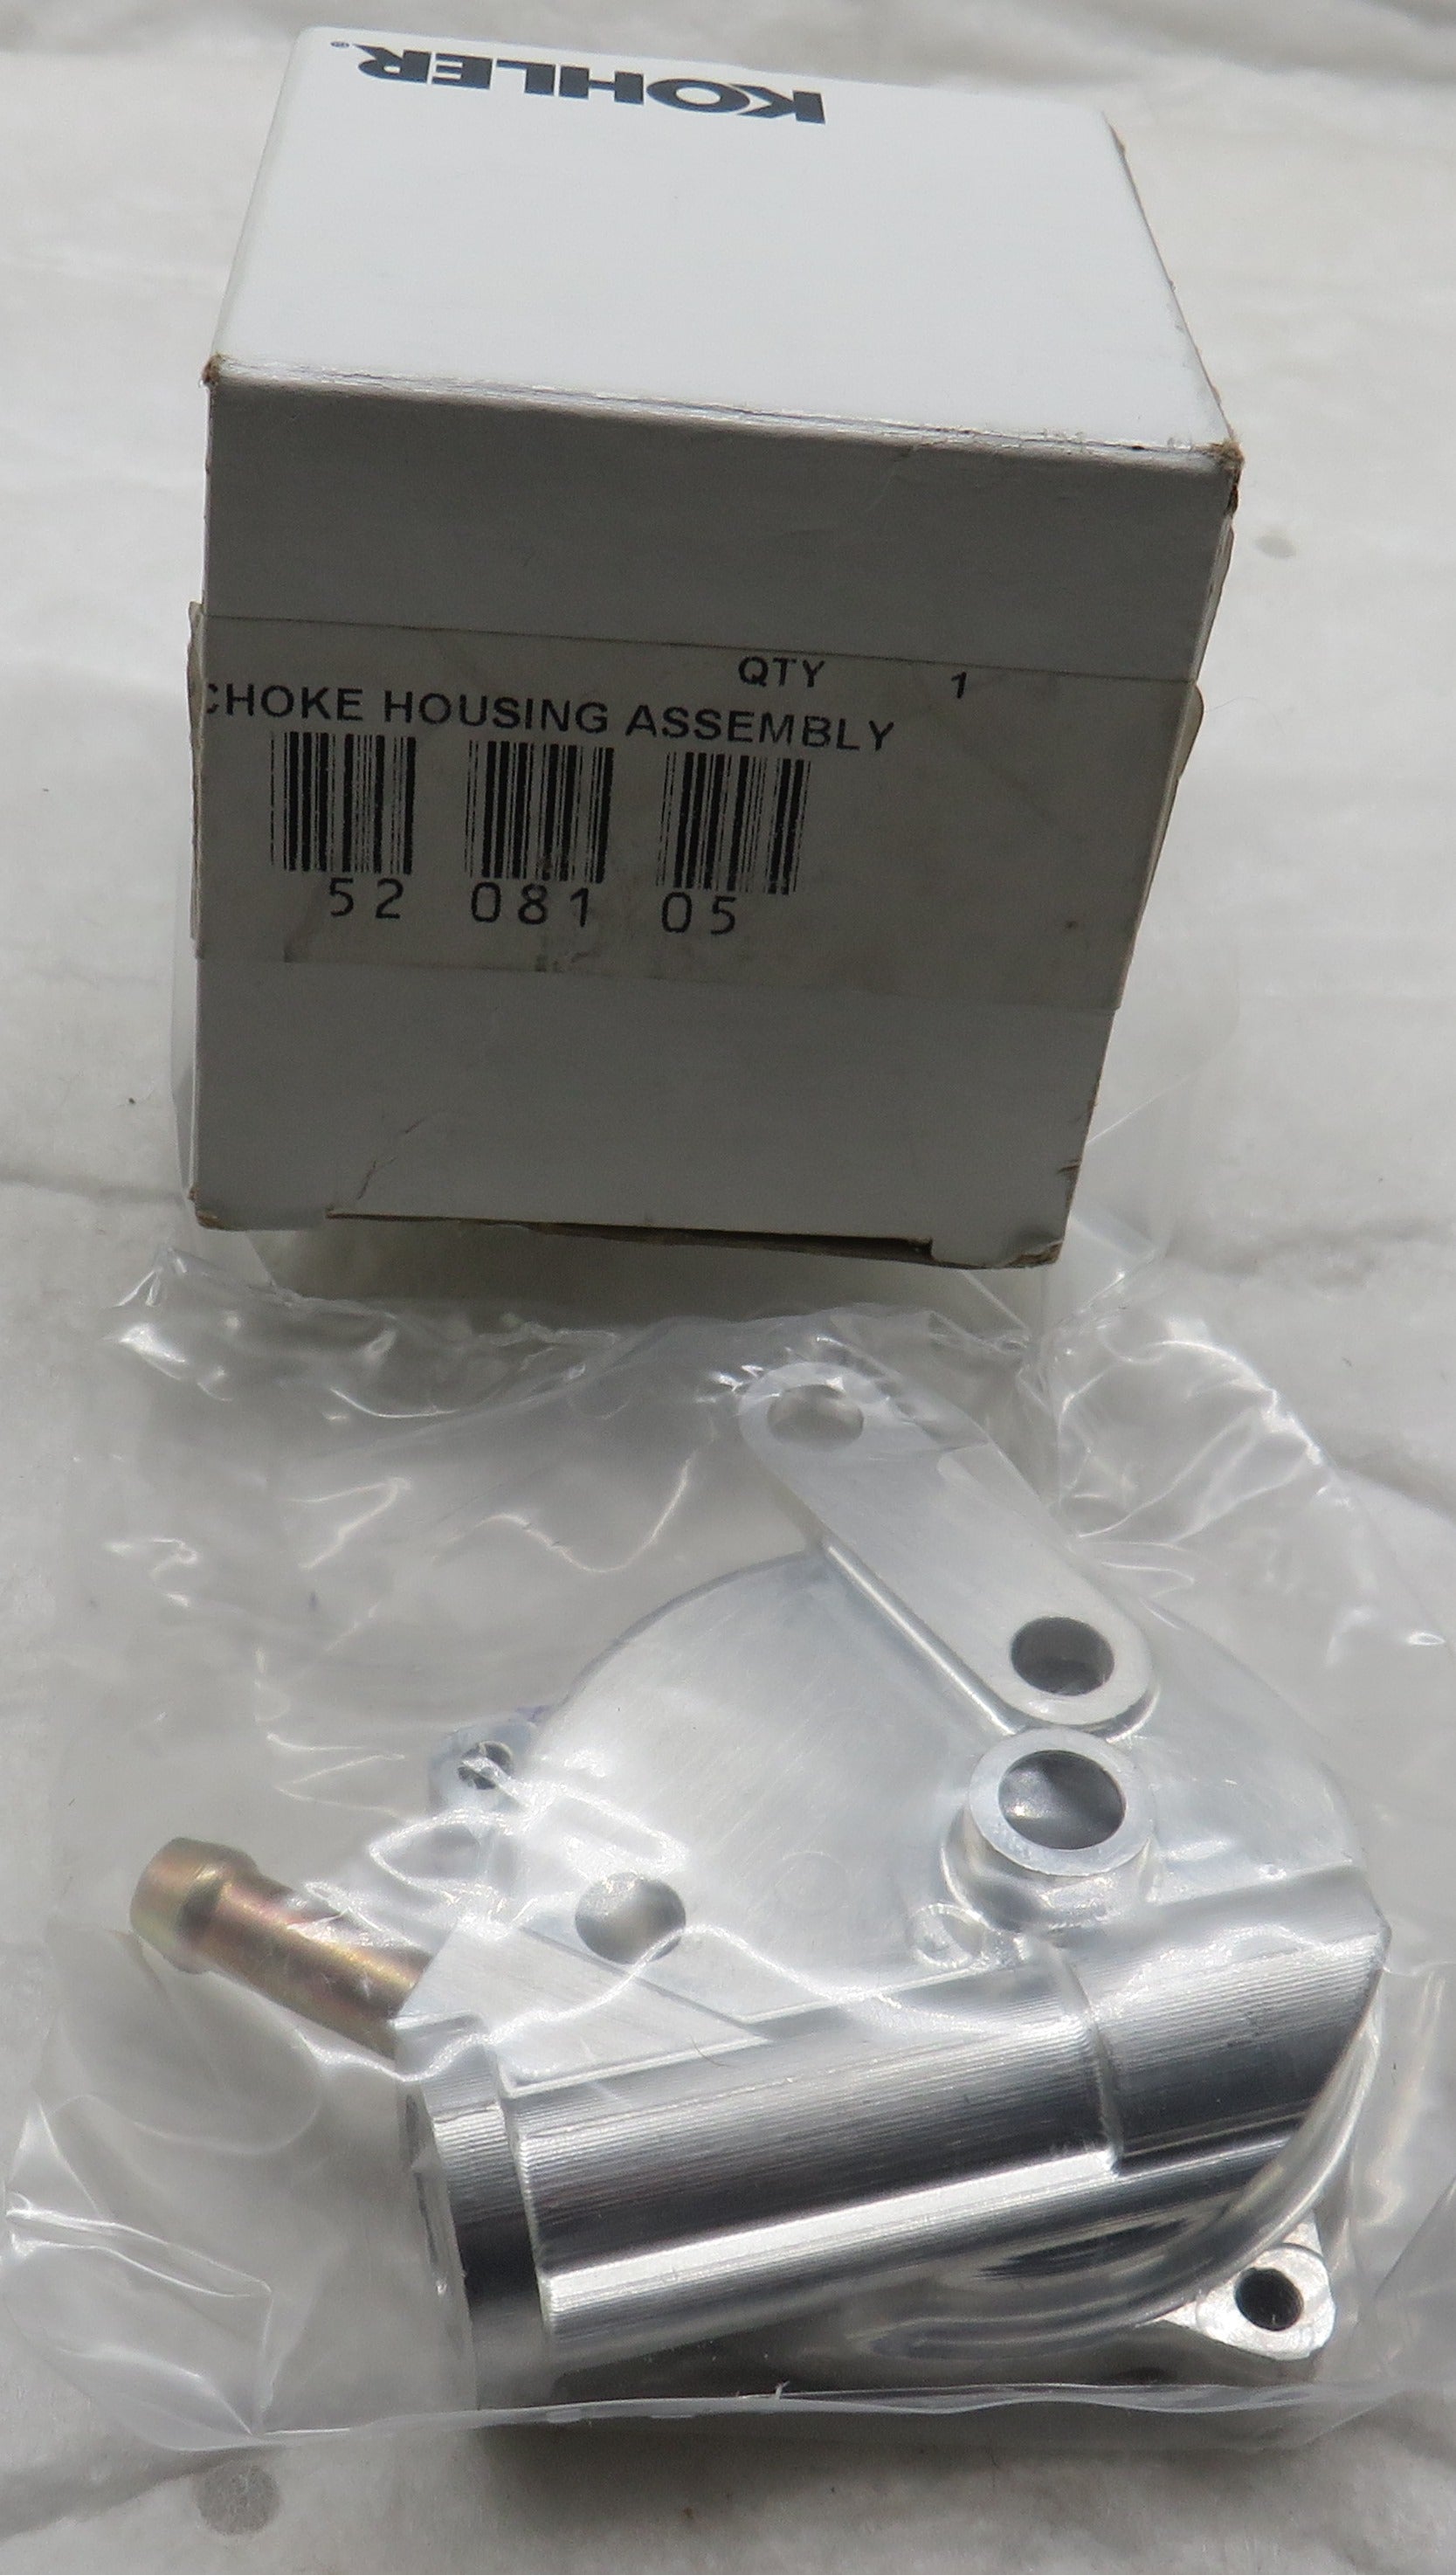 52 081 05 Kohler Choke Housing Assembly (Replaces 359355) Part of GM12236